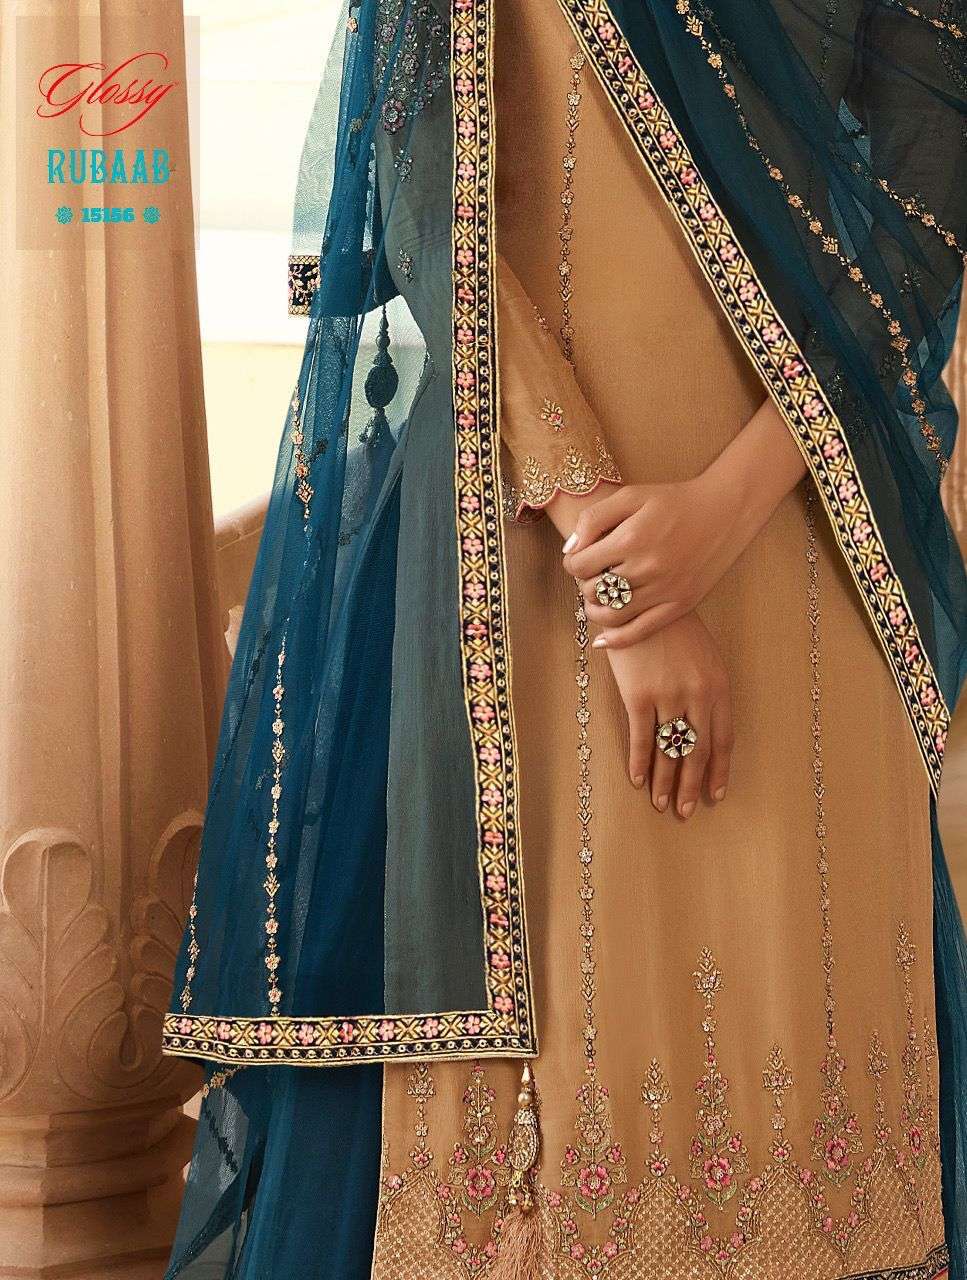 Glossy Rubaab Chinon Georgette With Embroidery Work Dress Ma...